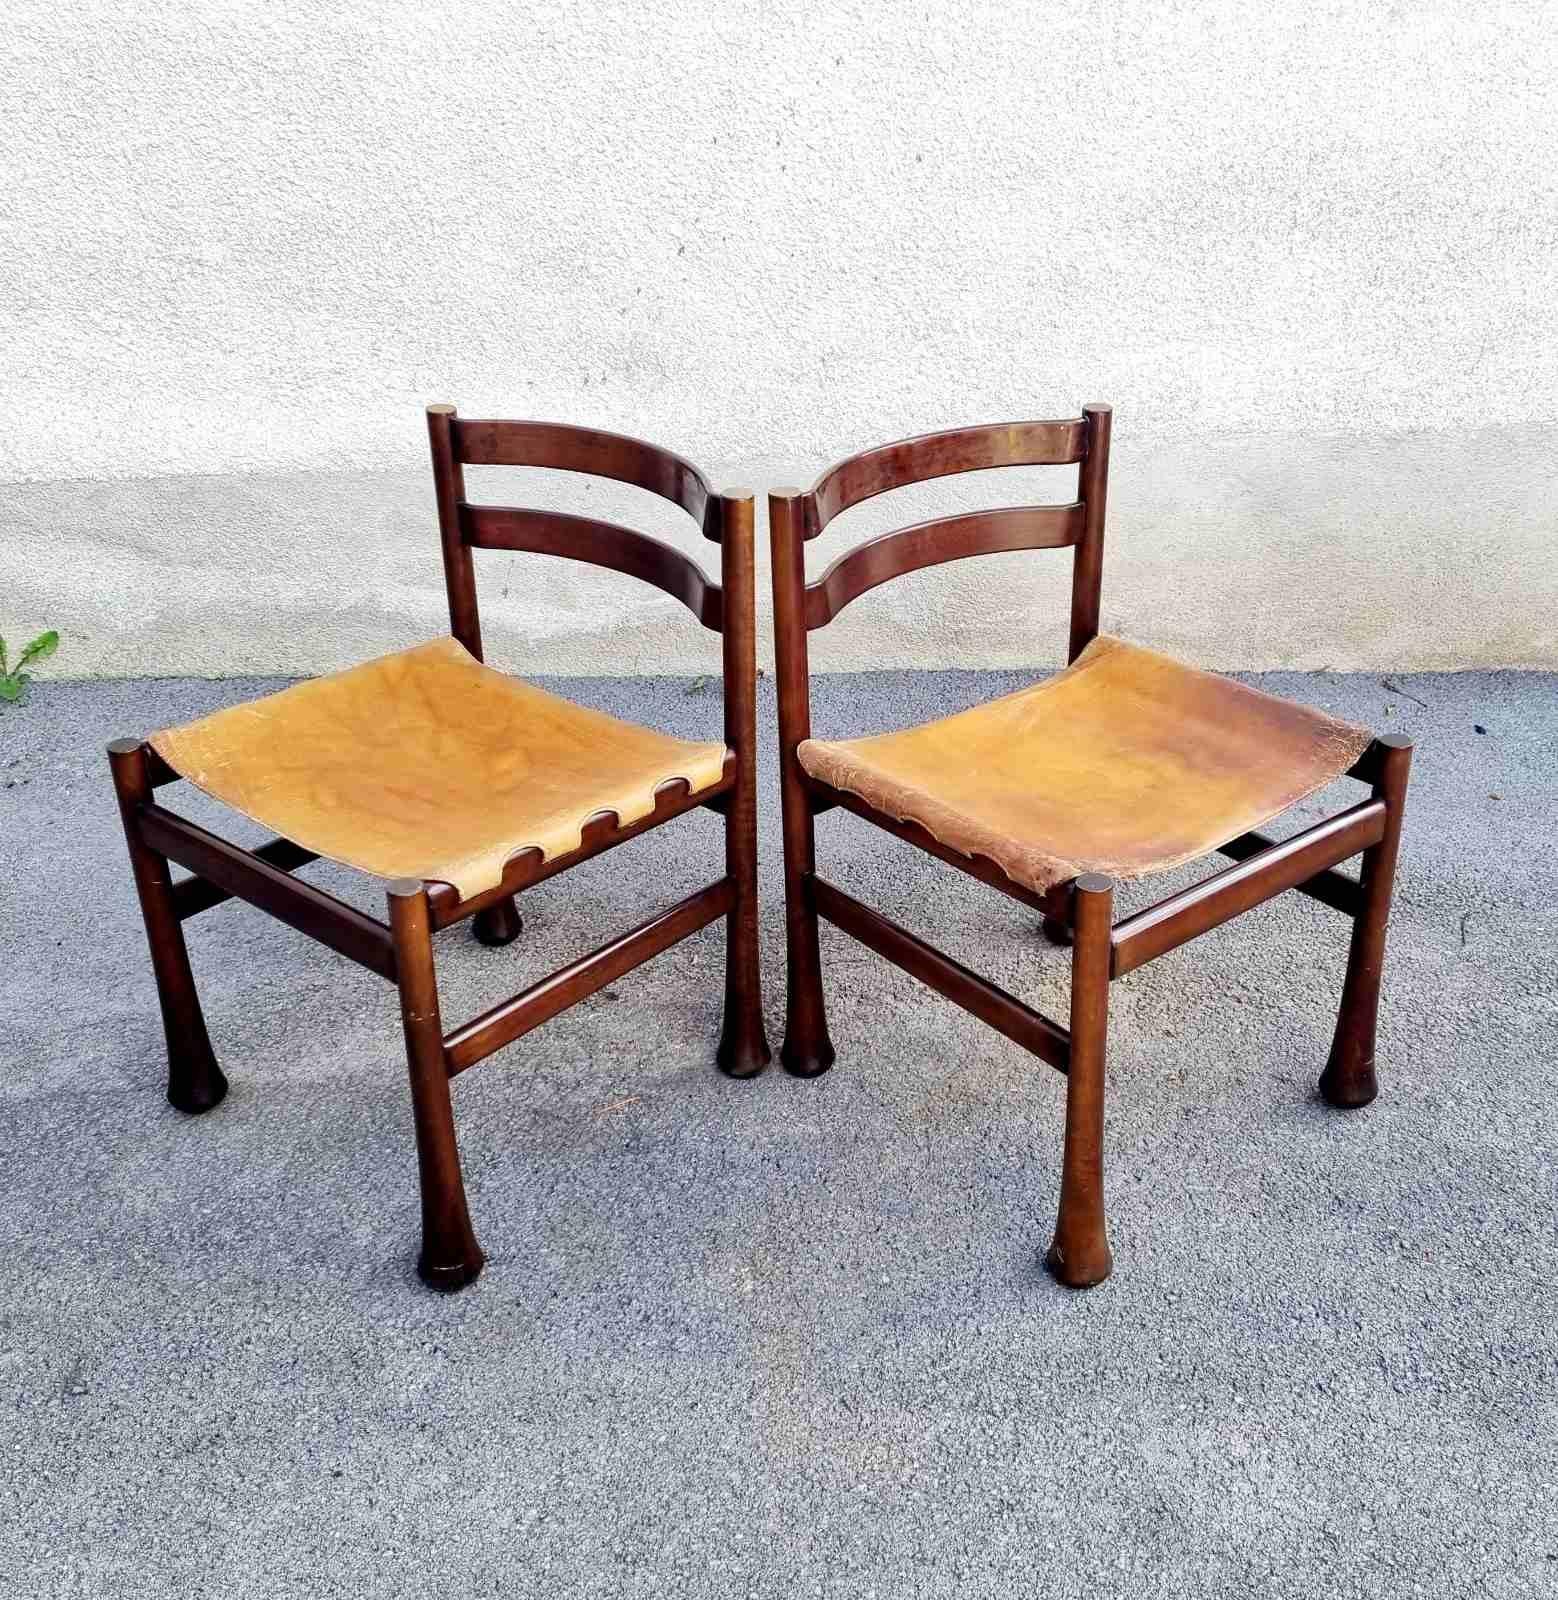 Italian Modern Rosewood and Leather Dining Chairs, Design Luciano Frigerio, 70s For Sale 6